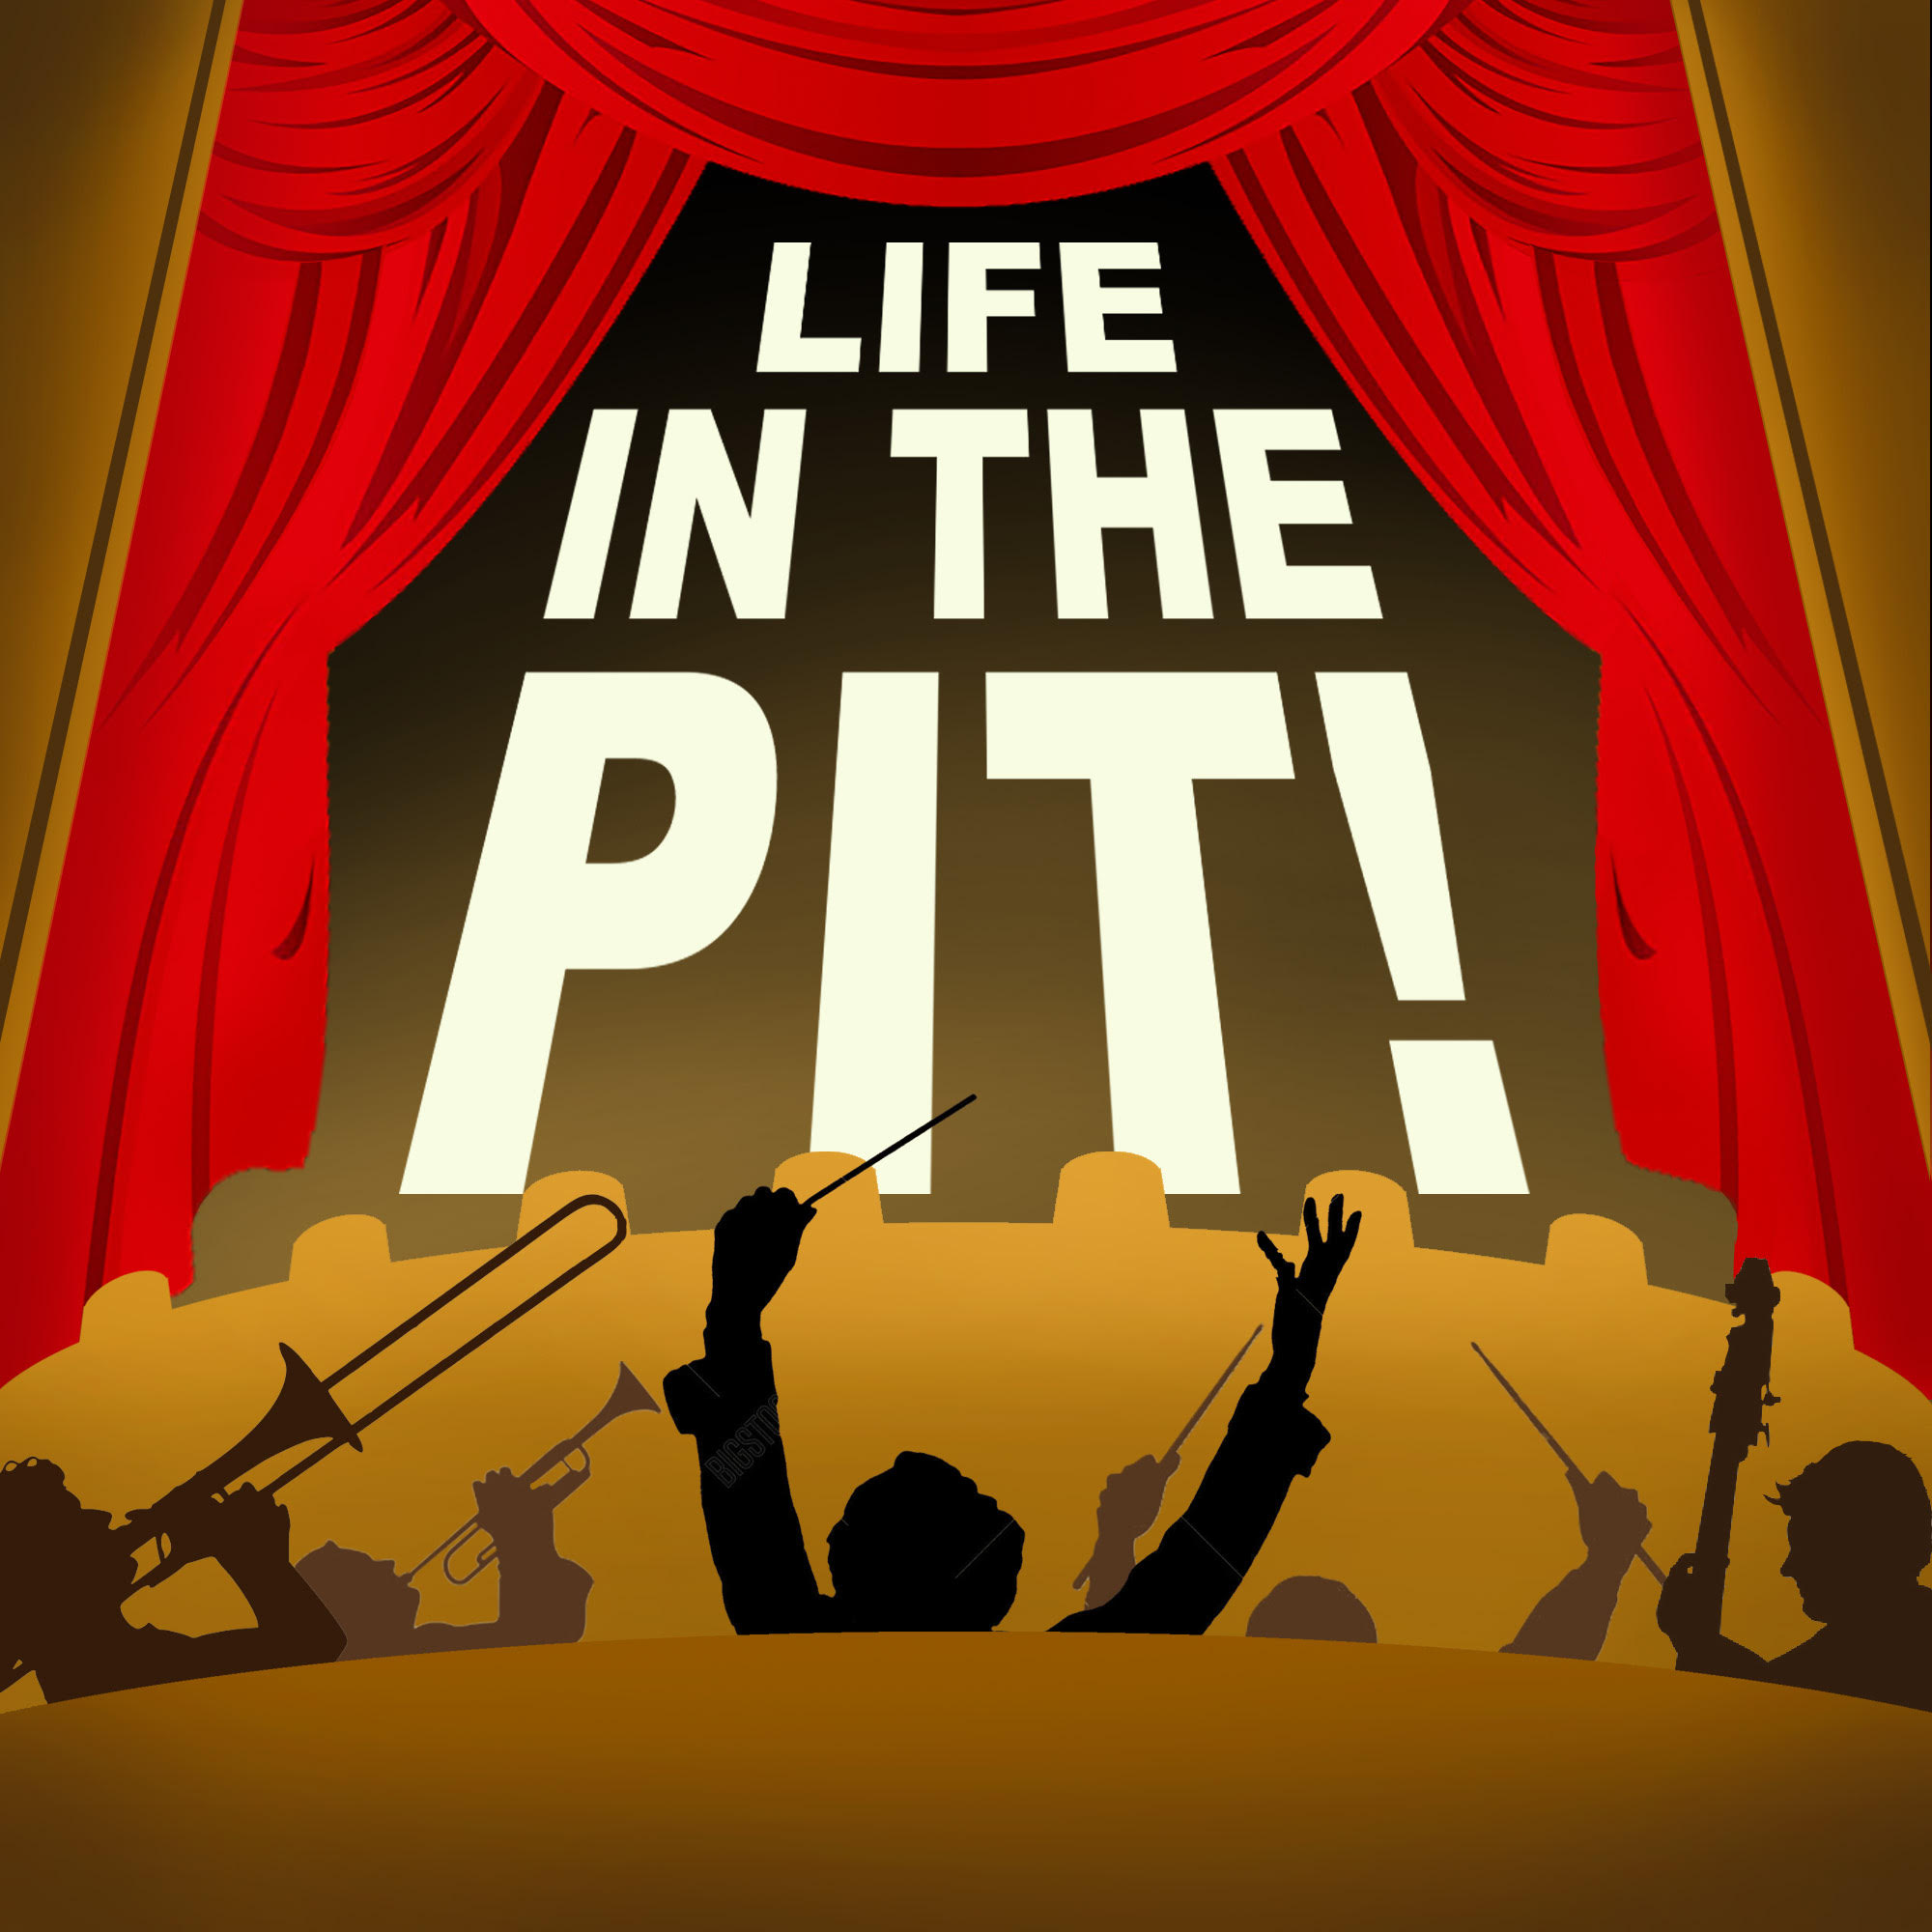 Life in the Pit